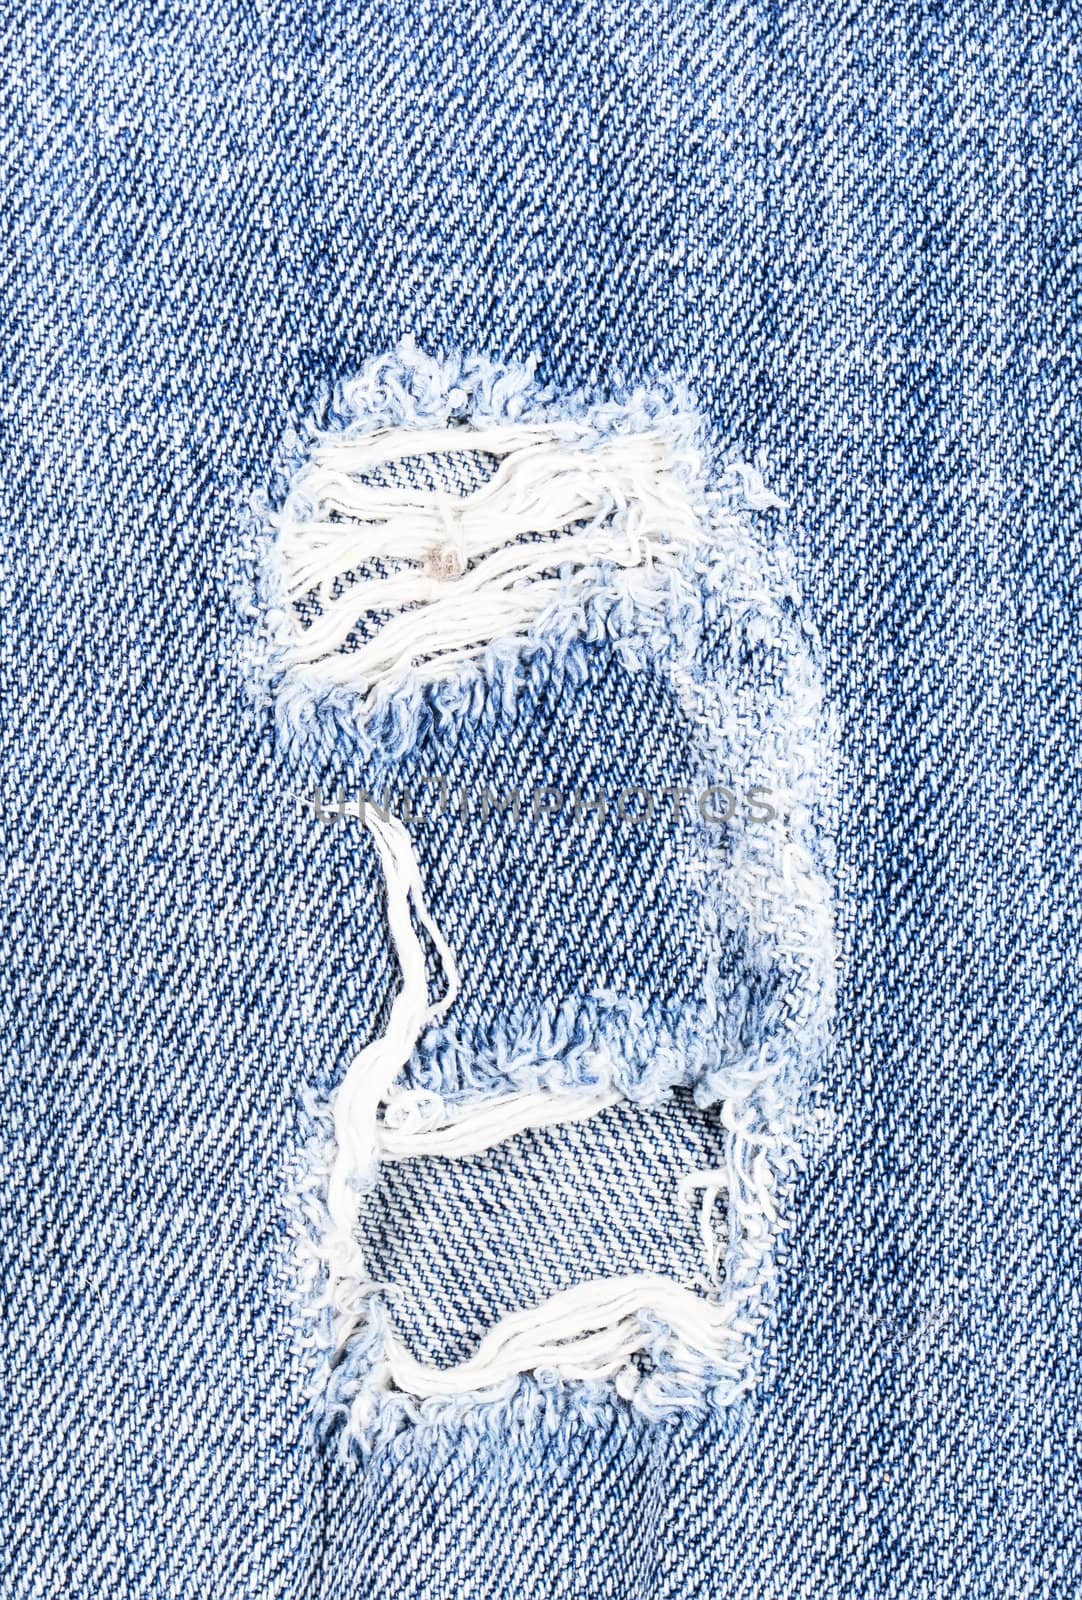 Beautiful hole in jeans textile